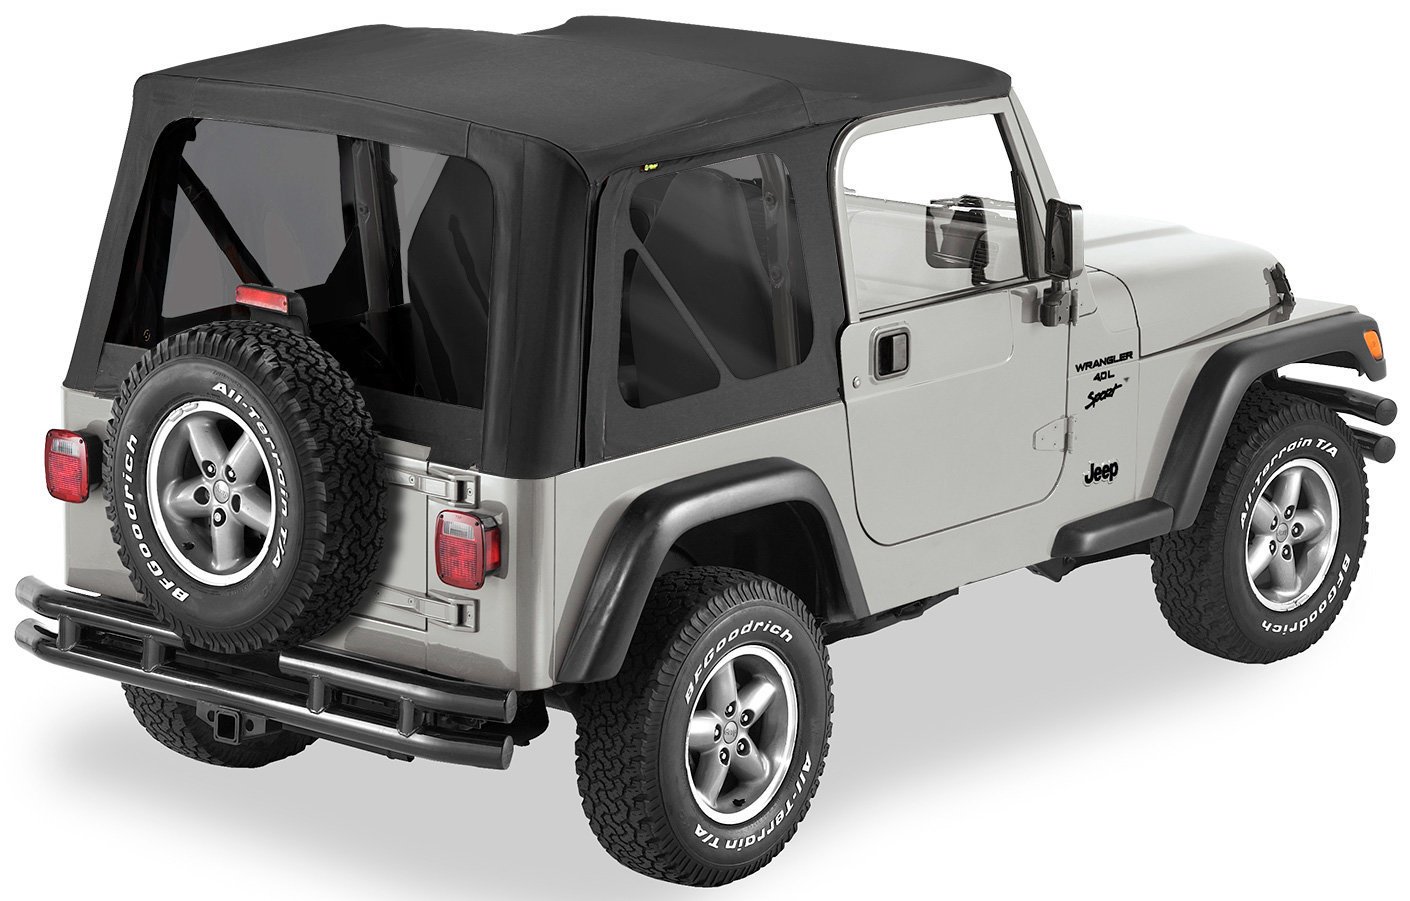 Bestop Supertop NX Soft Top with Tinted Windows without Upper Doors for  97-06 Jeep Wrangler TJ Quadratec